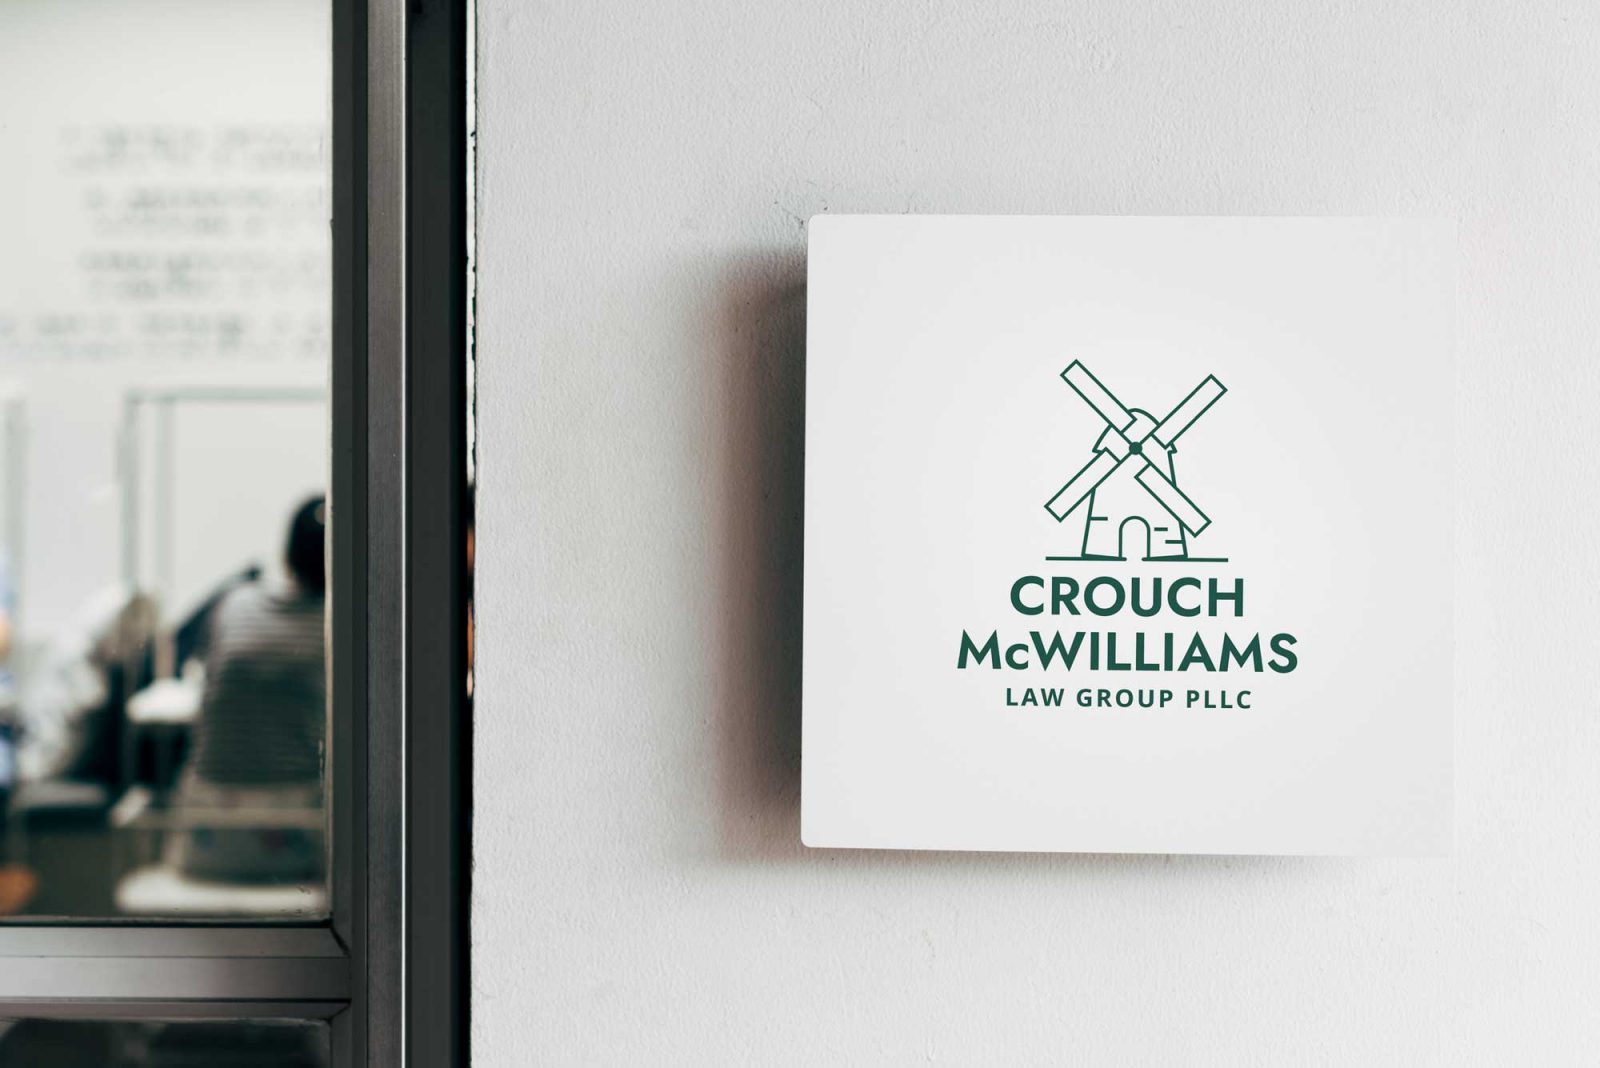 Crouch McWilliams logo design on small office signage